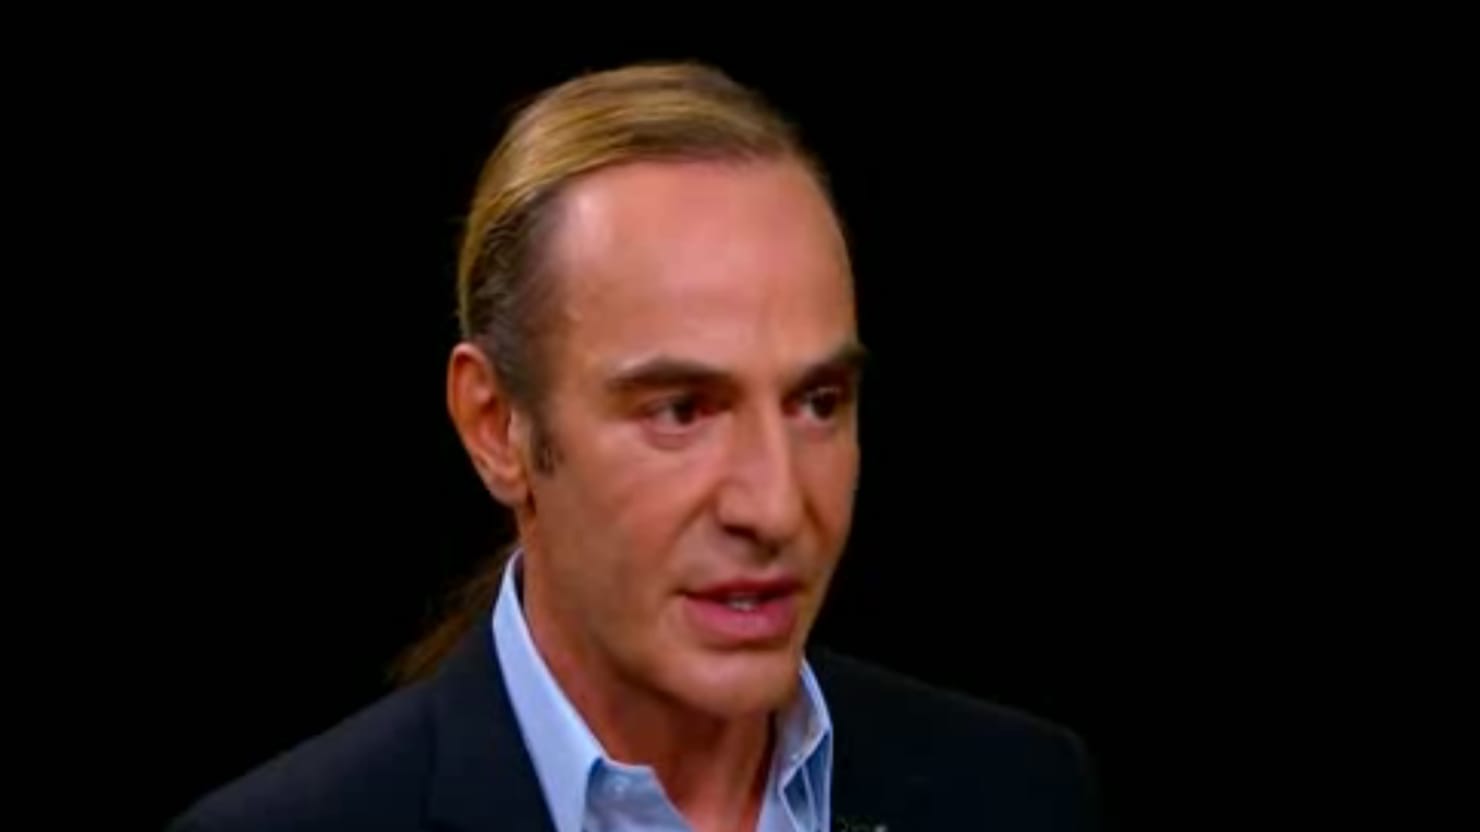 Highlights from John Galliano's Interview with Charlie Rose